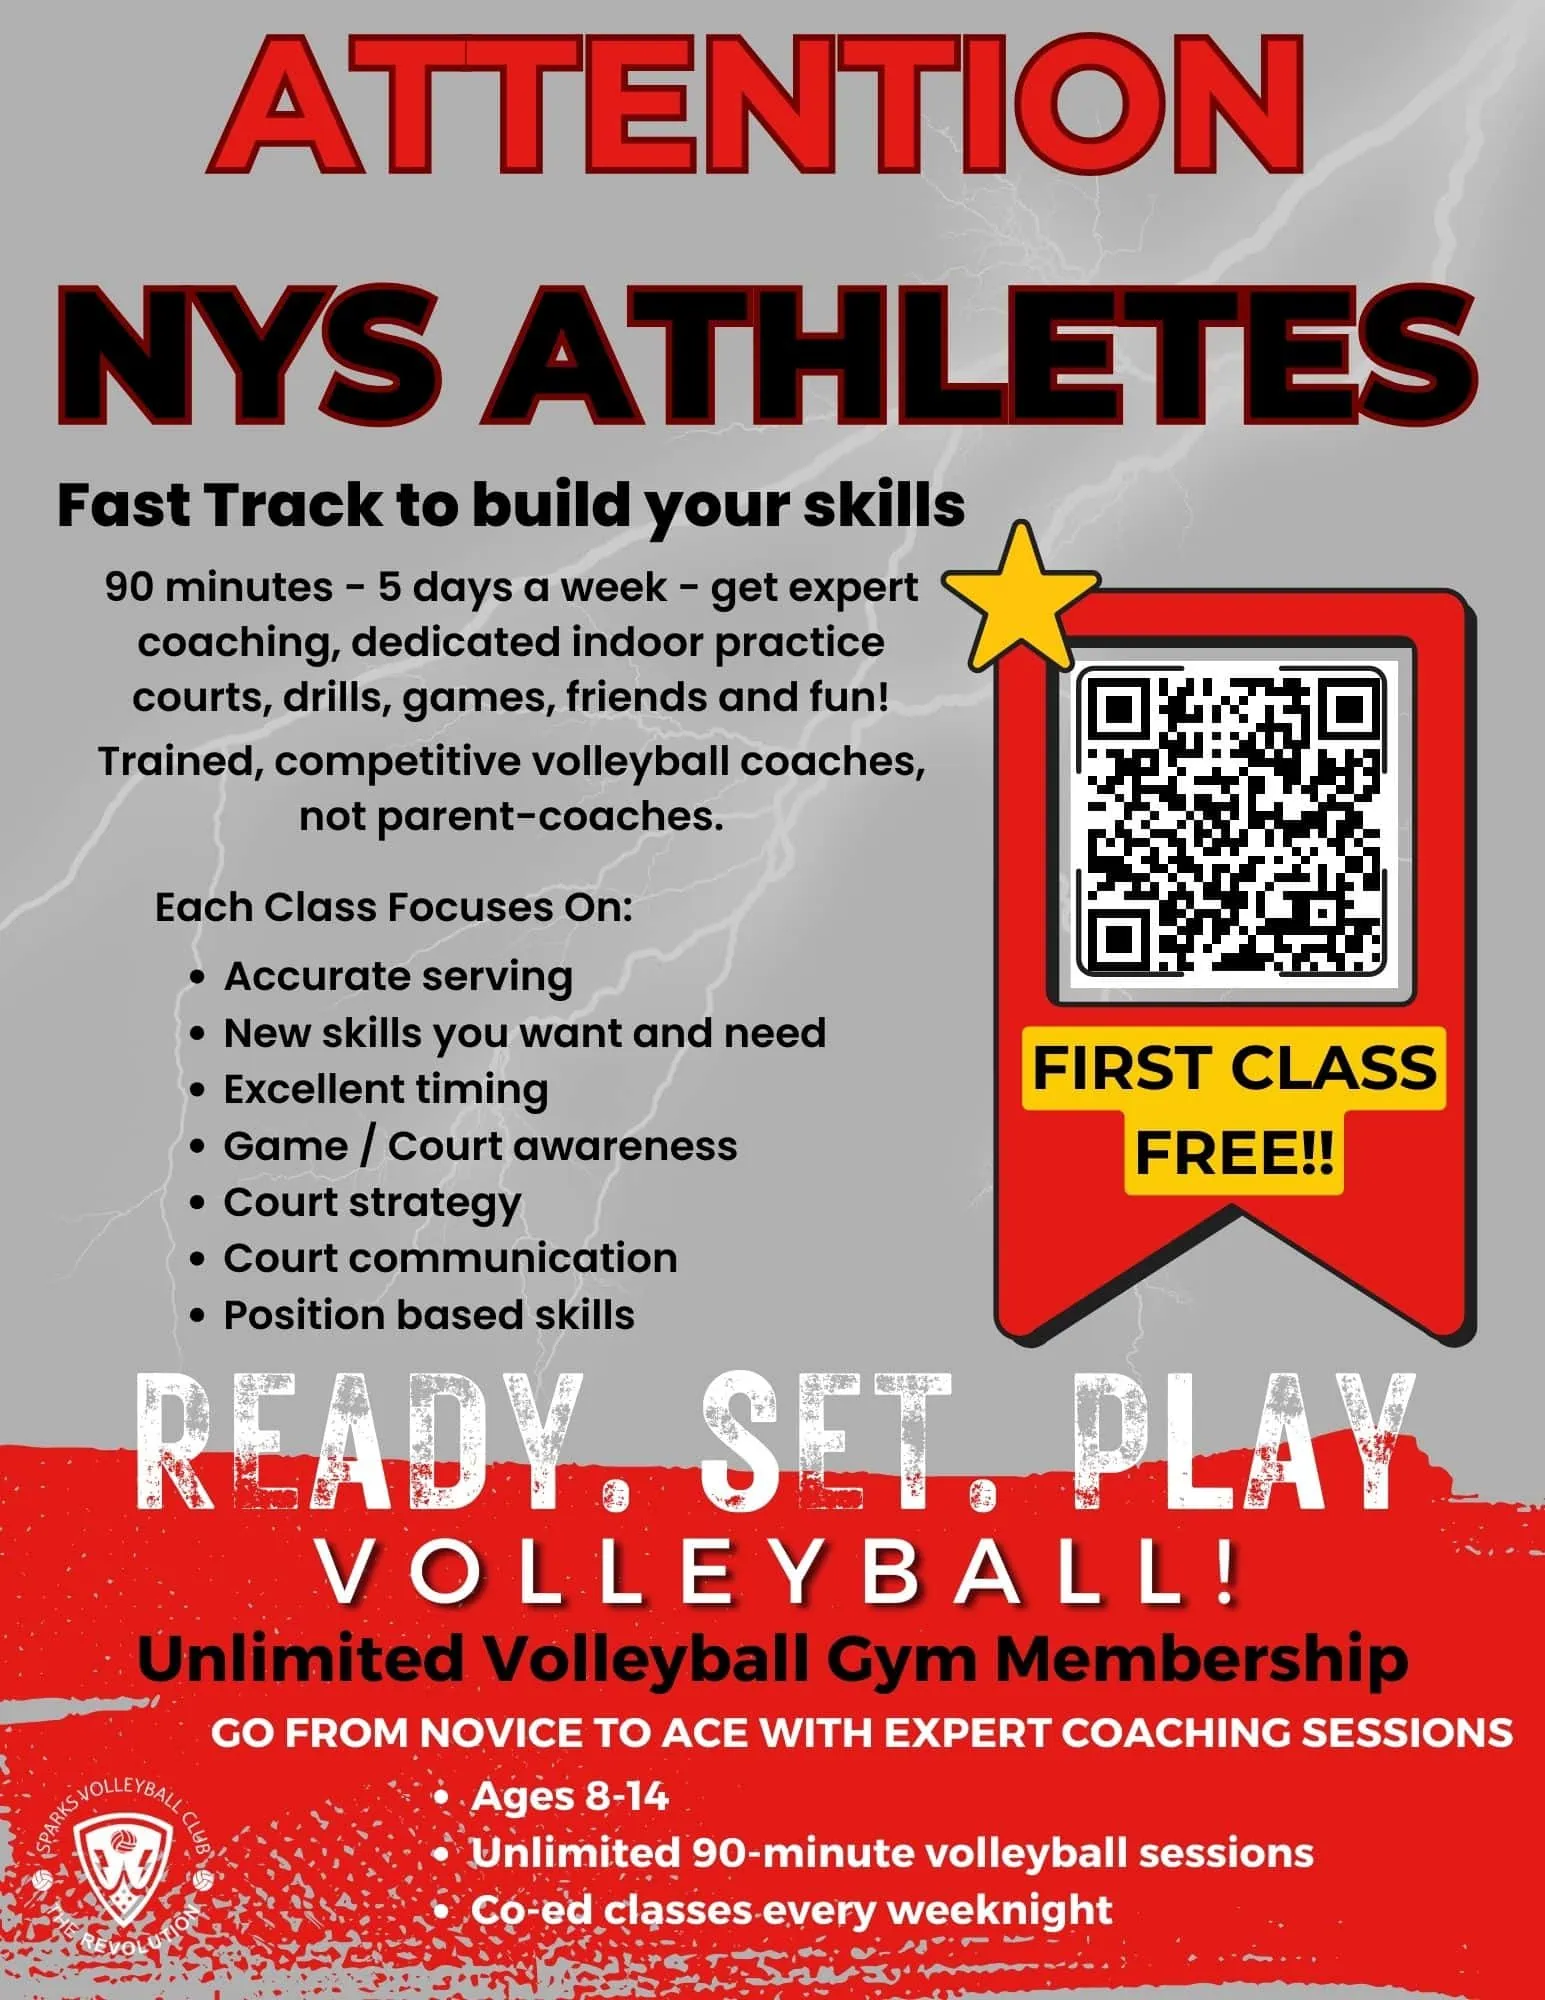 NYS Athletes – Fast track to BOOST your skills